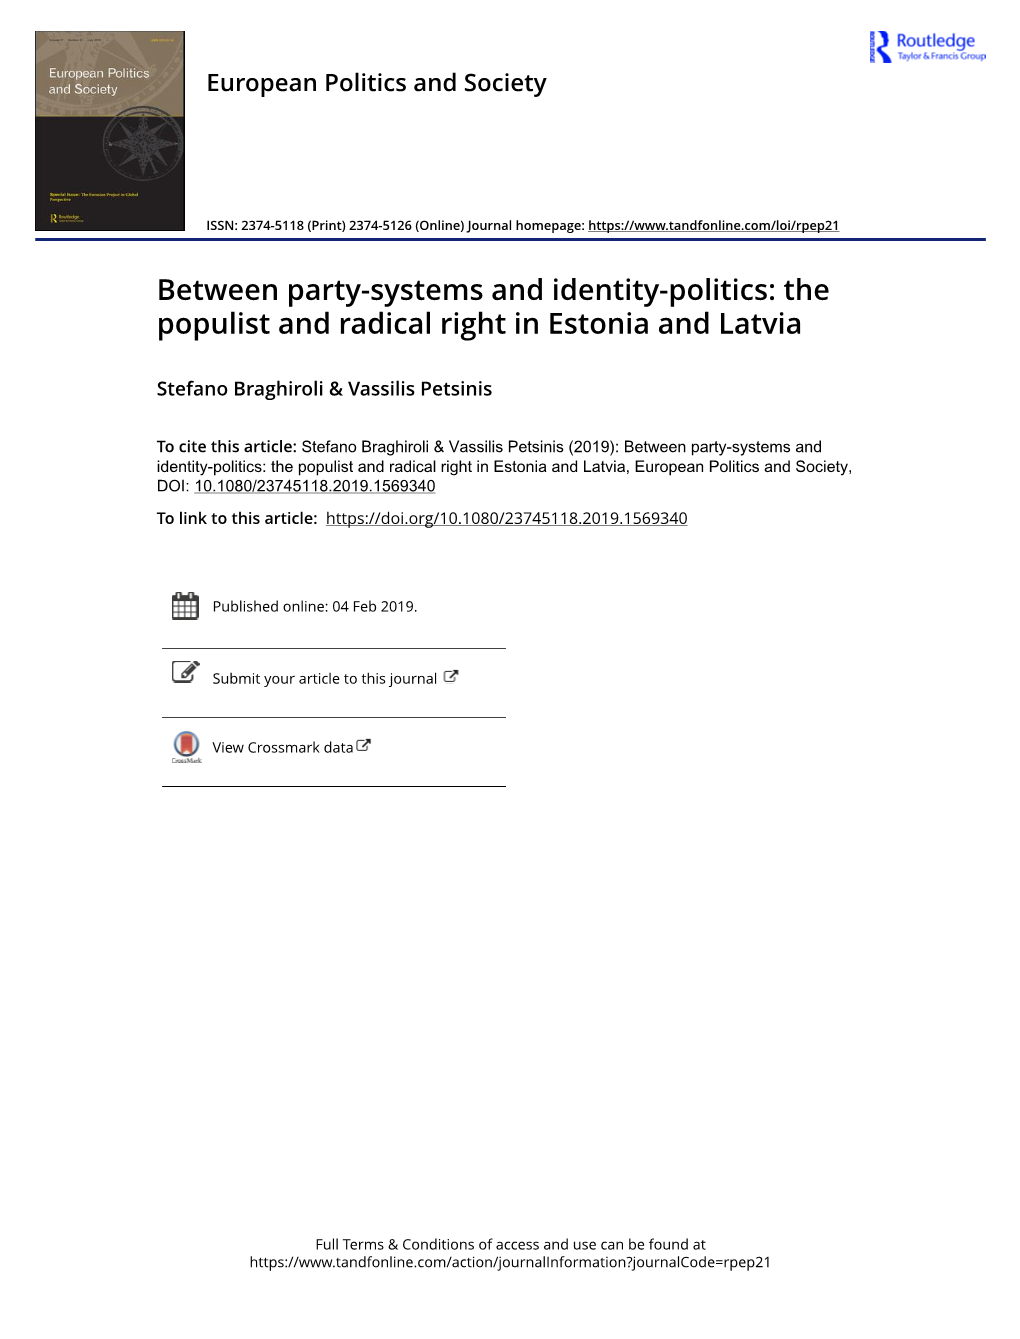 The Populist and Radical Right in Estonia and Latvia